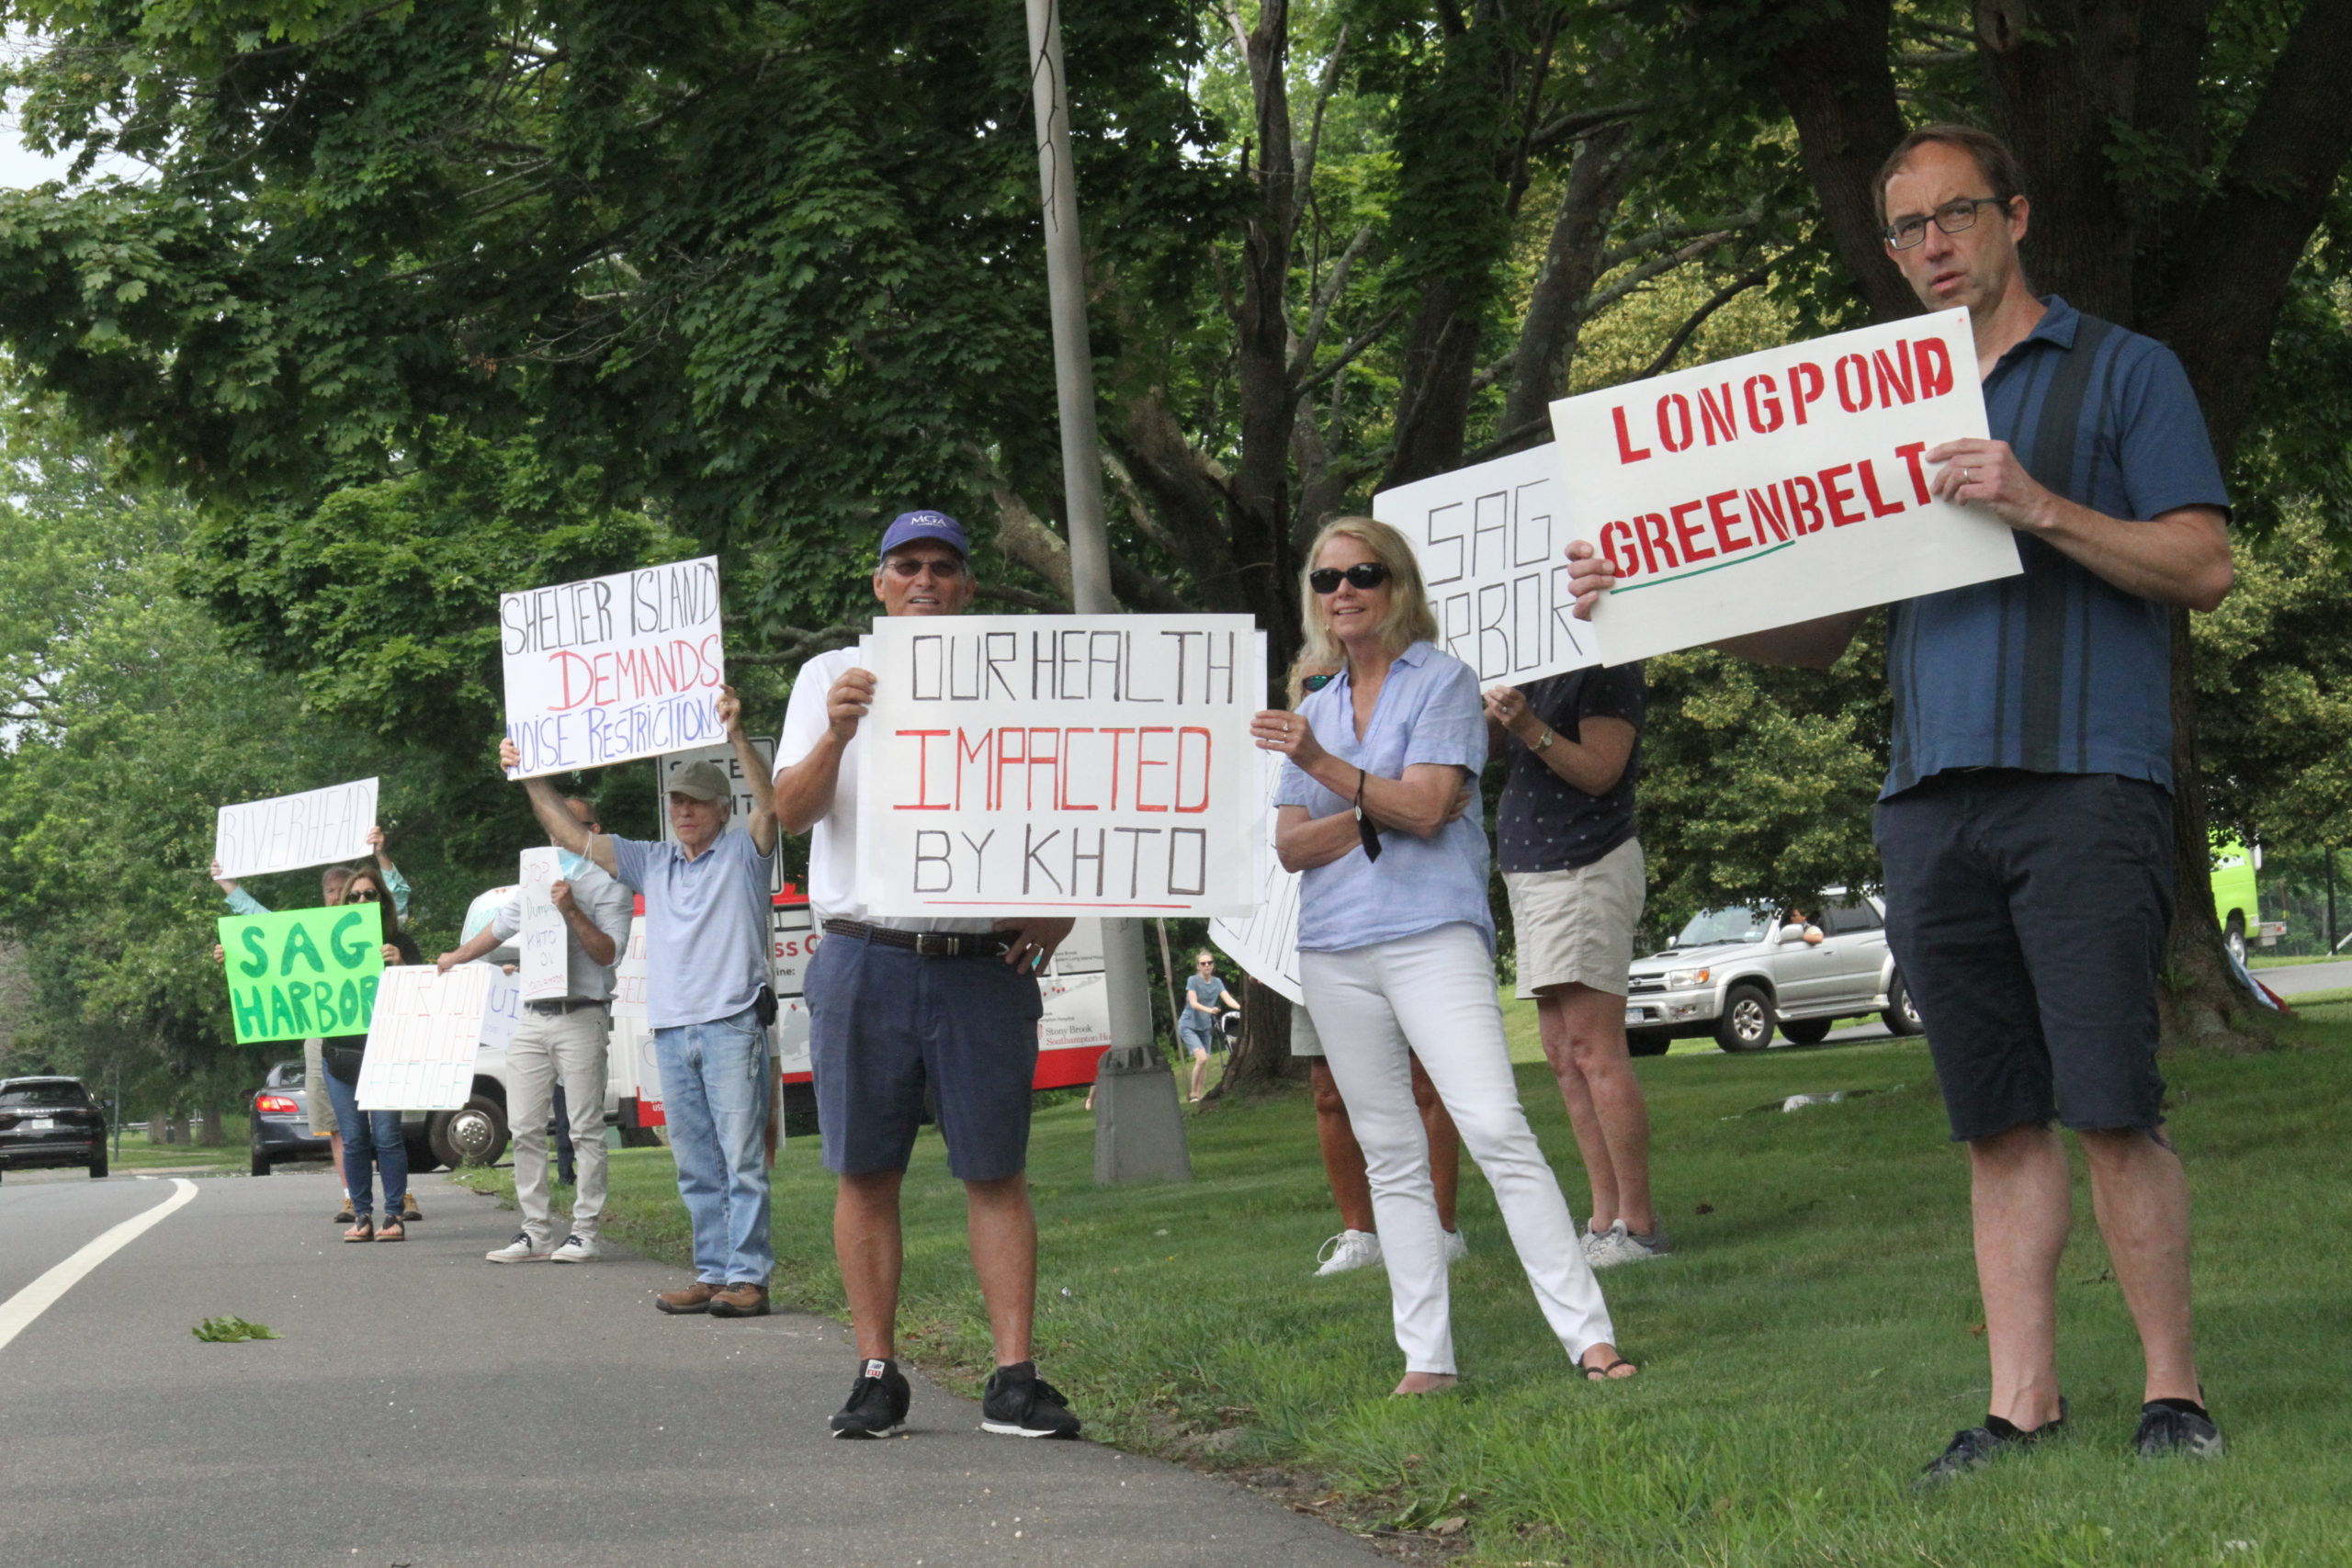 Those who would like to see East Hampton Airport closed for good rallied outside Town Hall on Tuesday ahead of a discussion on the airport's future.